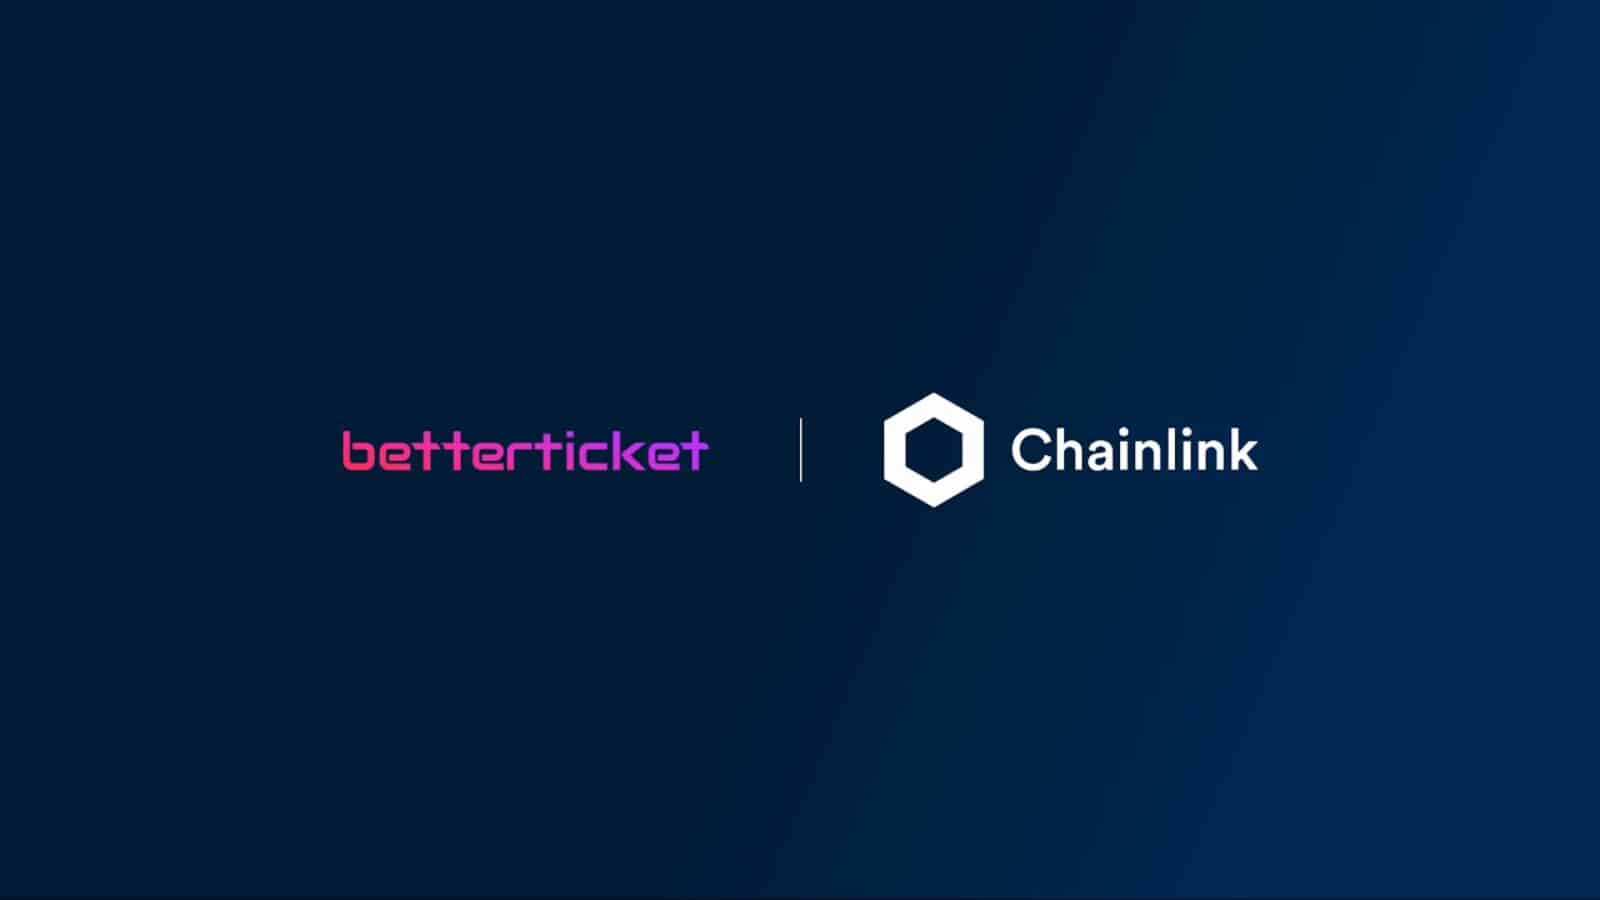 Betterticket Intregrates Chainlink VRF, Keepers, and Price Feeds to Create a Better Ticketing System